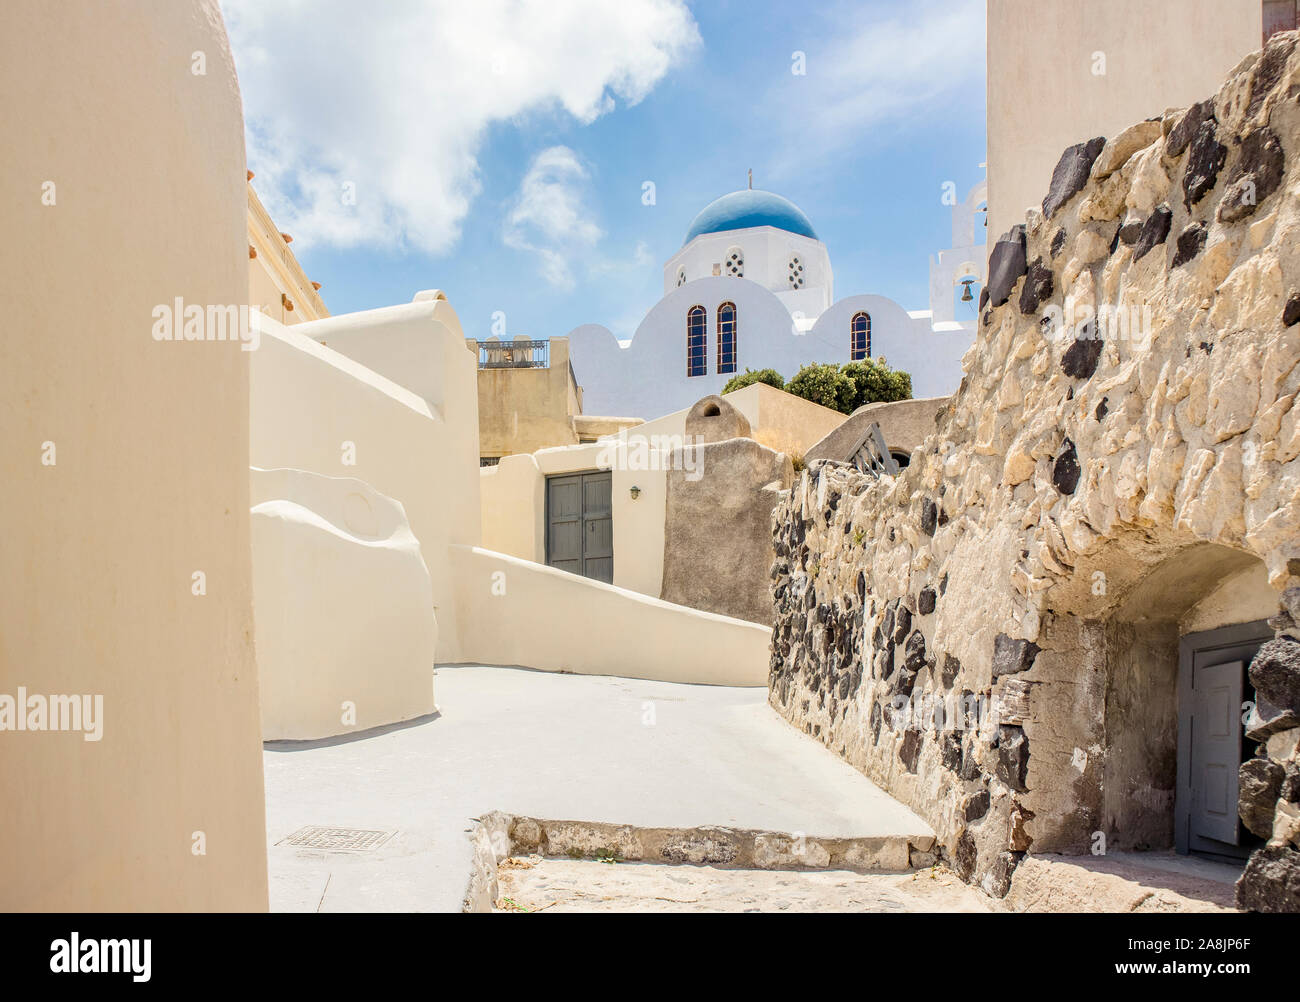 Street view of village Pyrgos and blue dome church on island of Santorini, Greece in Europe. Stock Photo